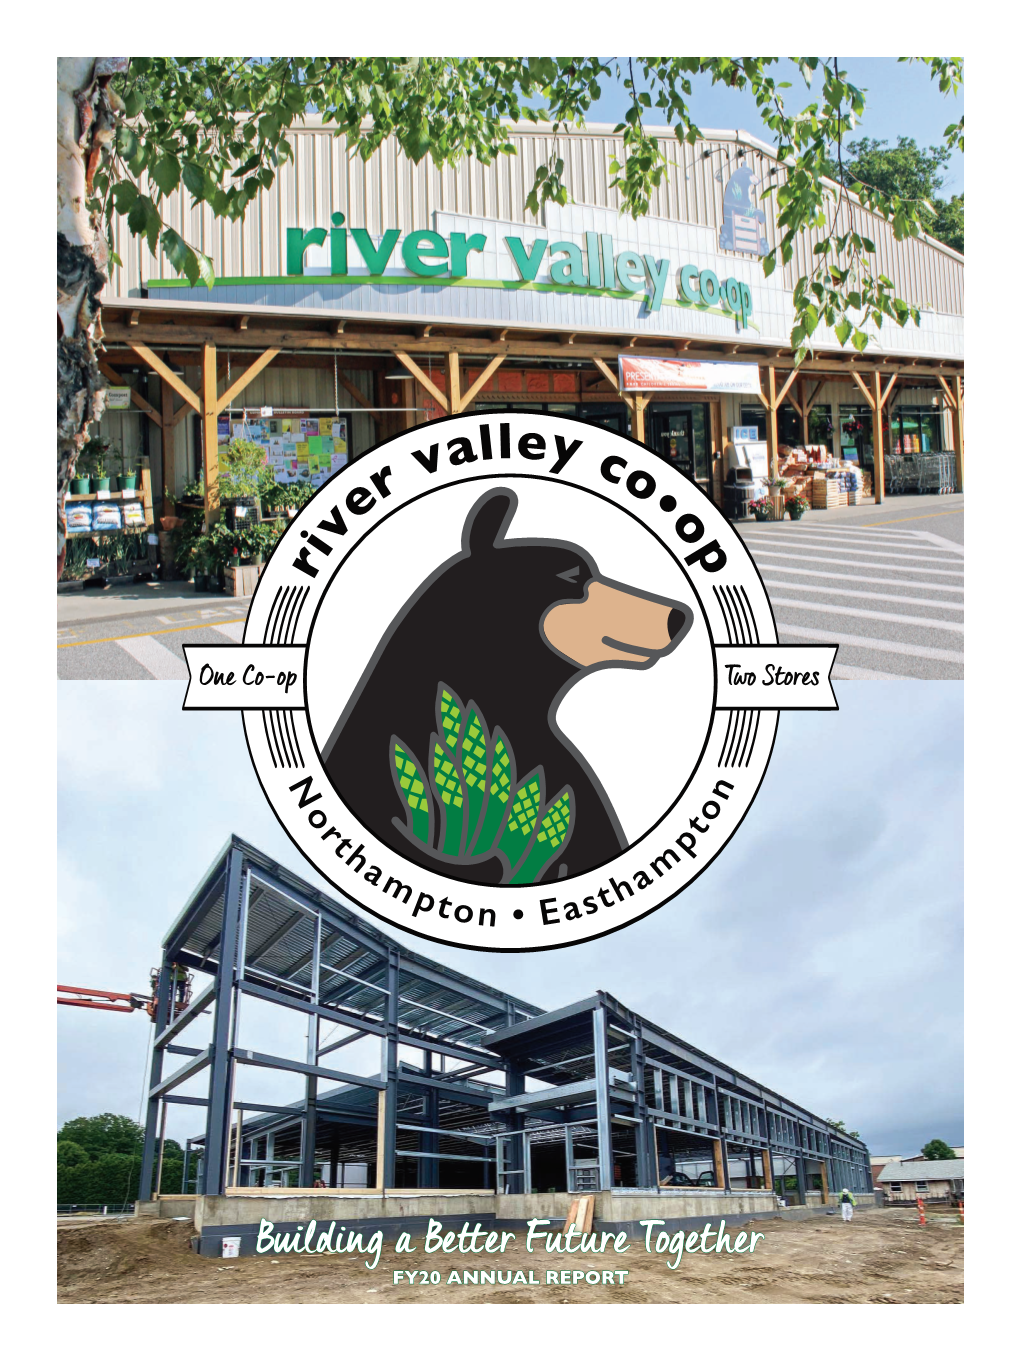 In This Annual Report, We Are Informing River Valley Co-Op